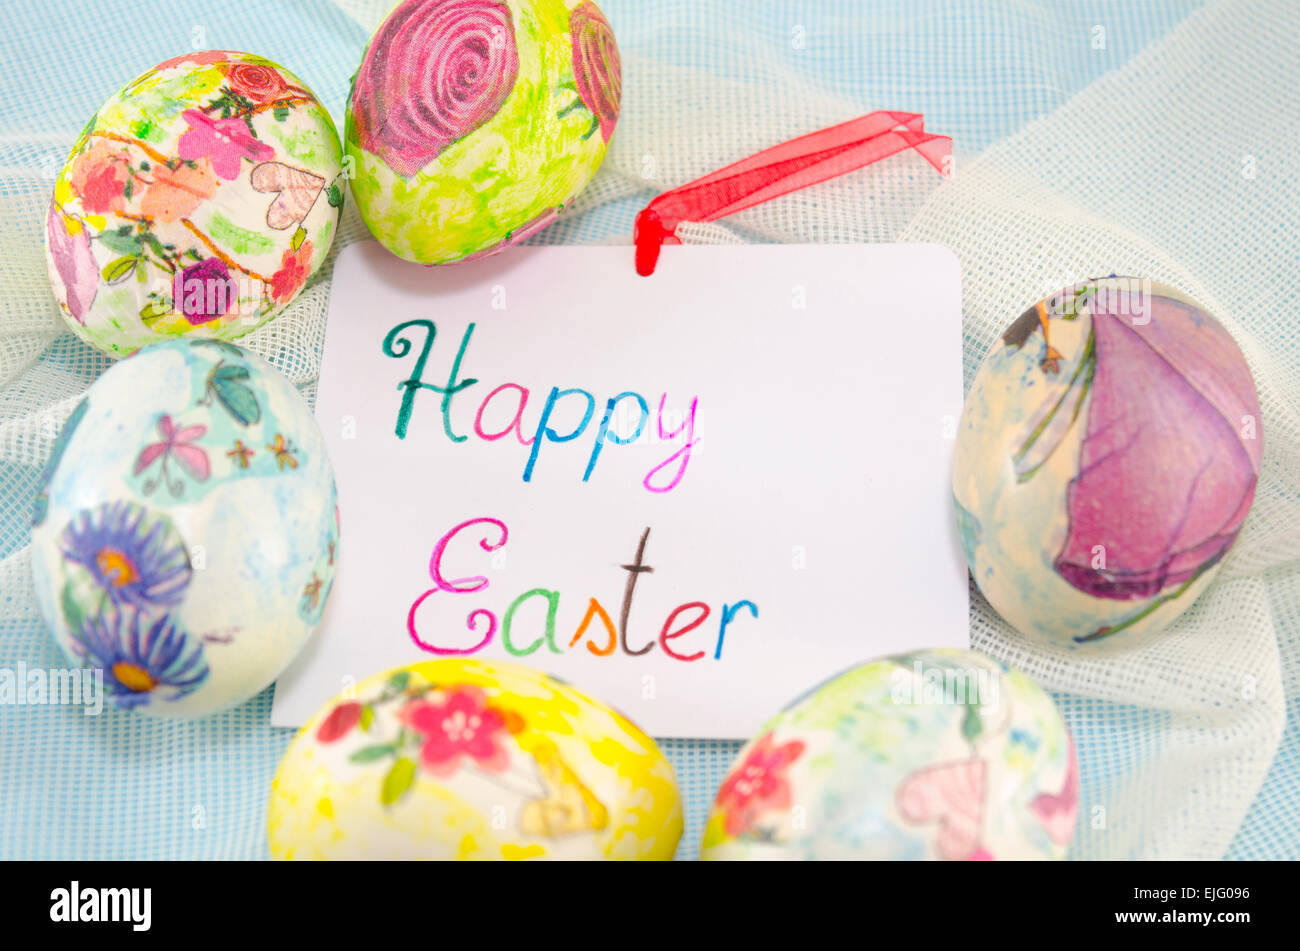 Bunch of handcolored decoupage Easter eggs around a handwritten ...